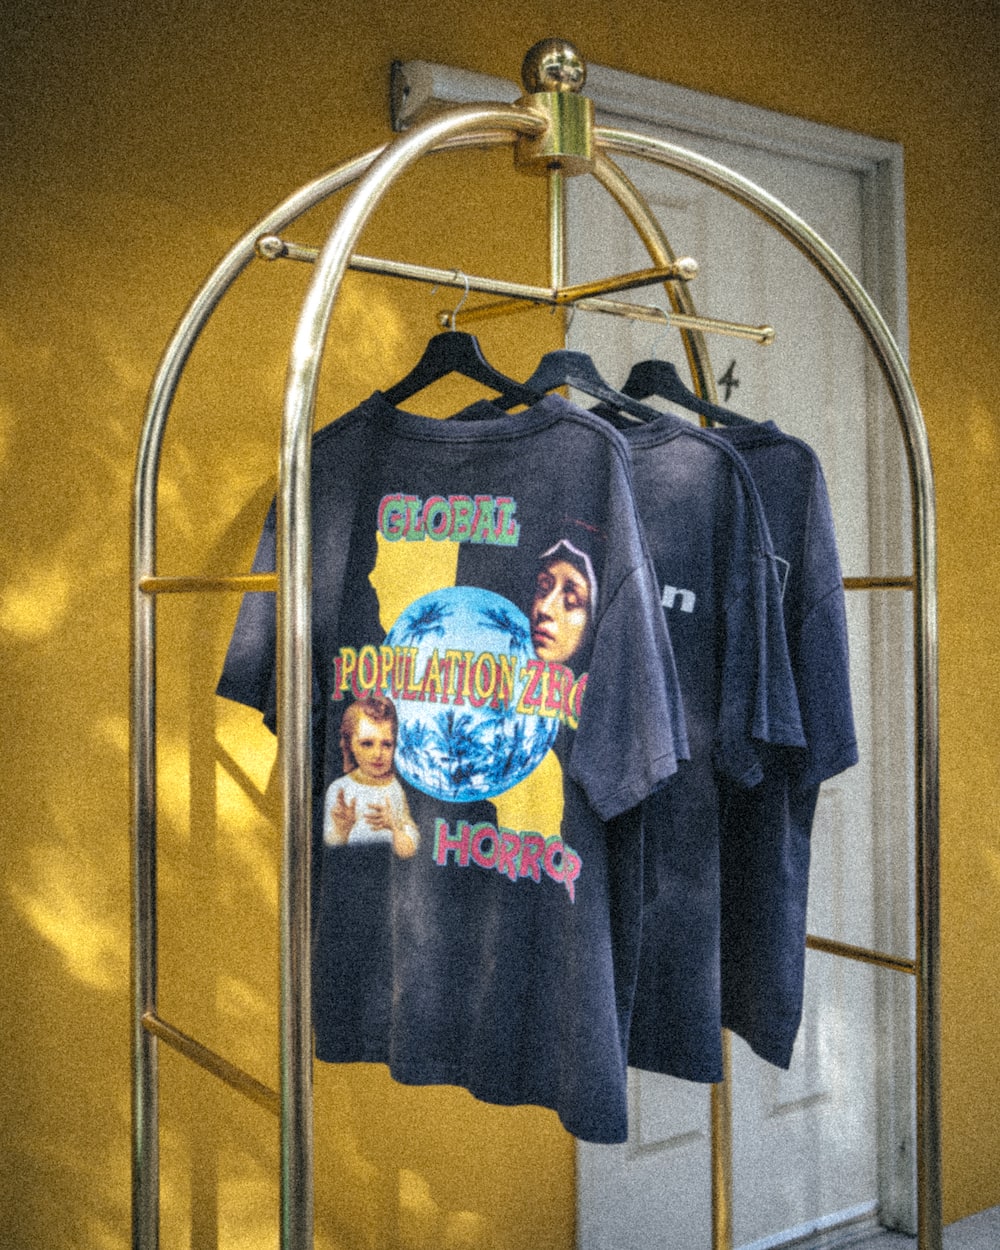 SAINT MICHAEL 2024SS - The last items from the SAINT Mxxxxxx 2024 Spring/Summer Collection are now available! In-store and online sales start at 10:00 AM, Japan Standard Time on May 18th (Sat.)! - SM-YS8-0000-002(ON EARTH Short Sleeve T-shirt) - 1-002